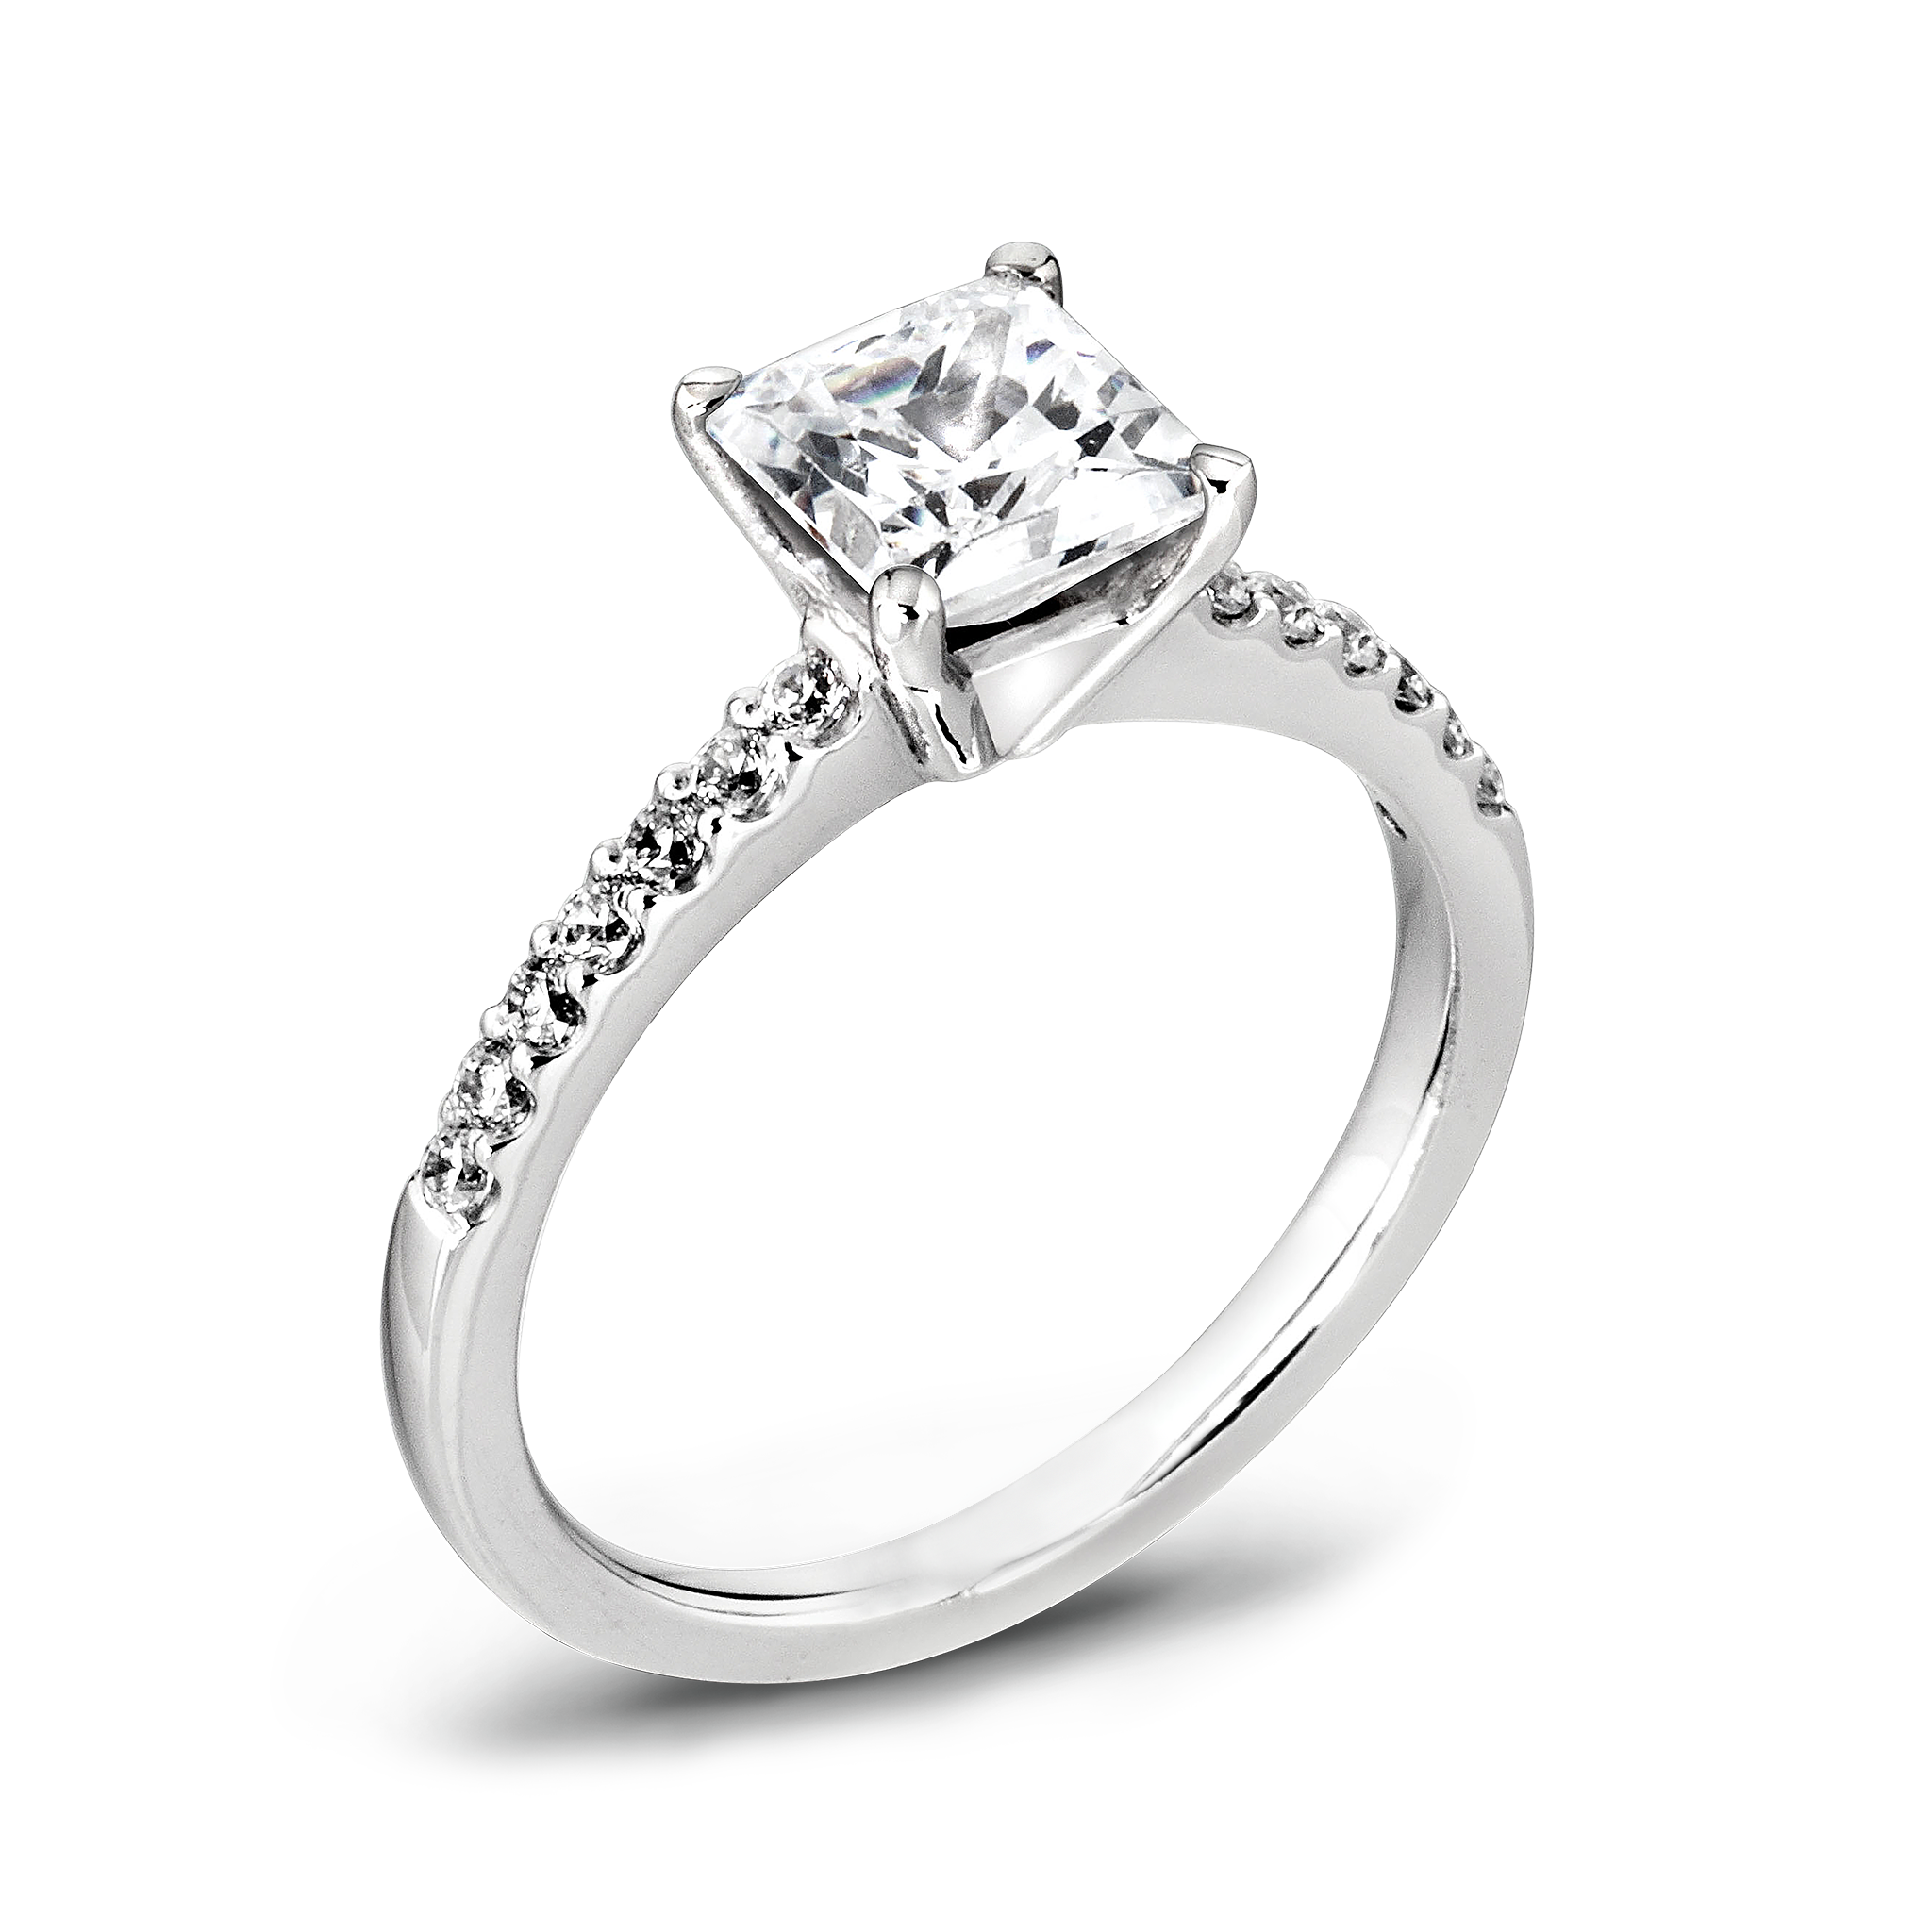 Princess Cut Canadian Diamond Fairtrade Gold Engagement Ring in